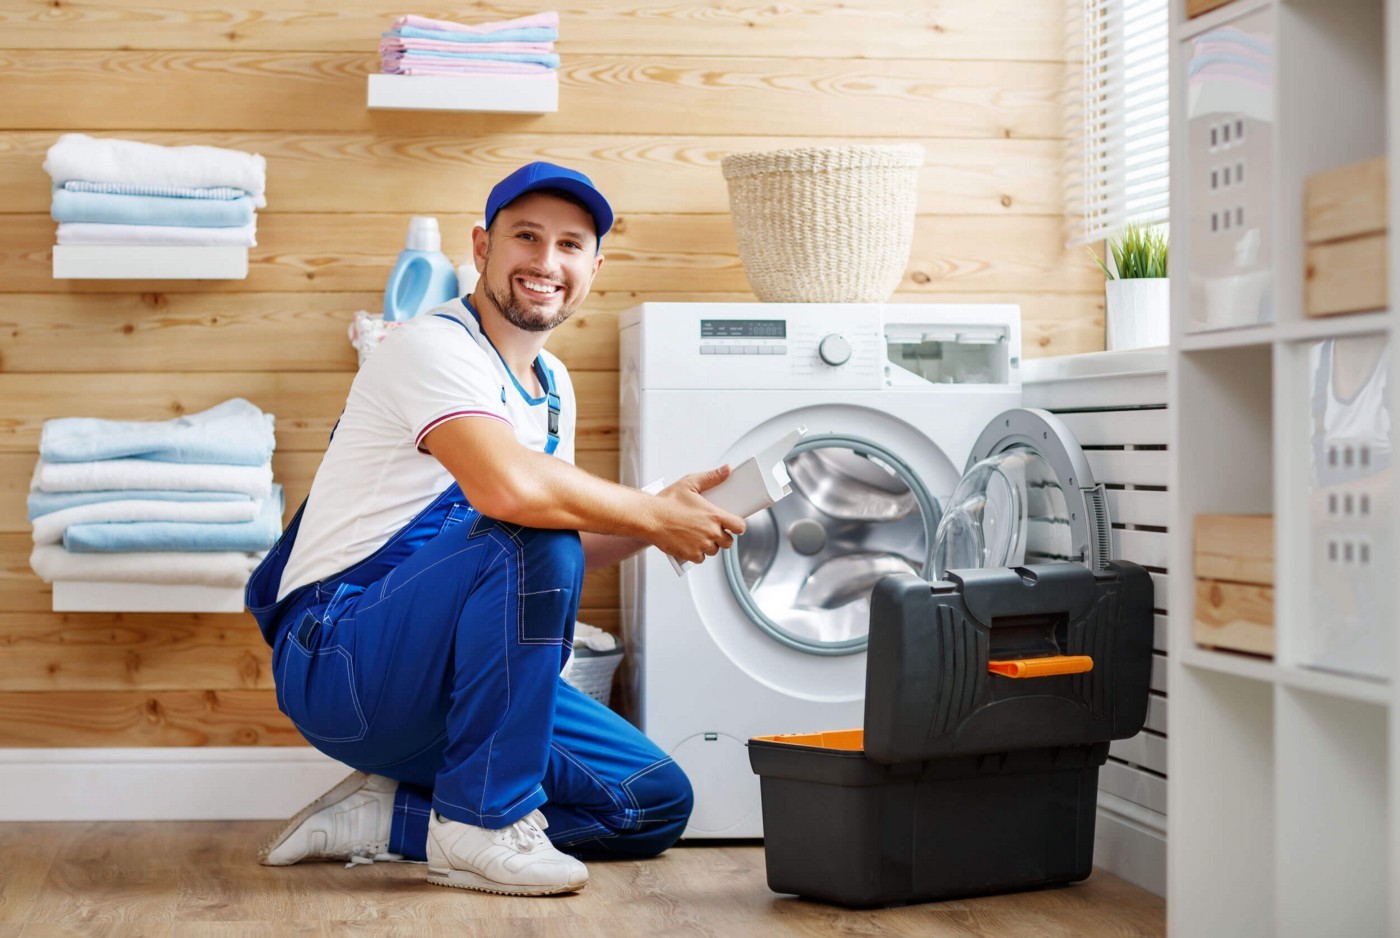 3 Simple Tips for Finding the Best Home Appliance Repair Technician